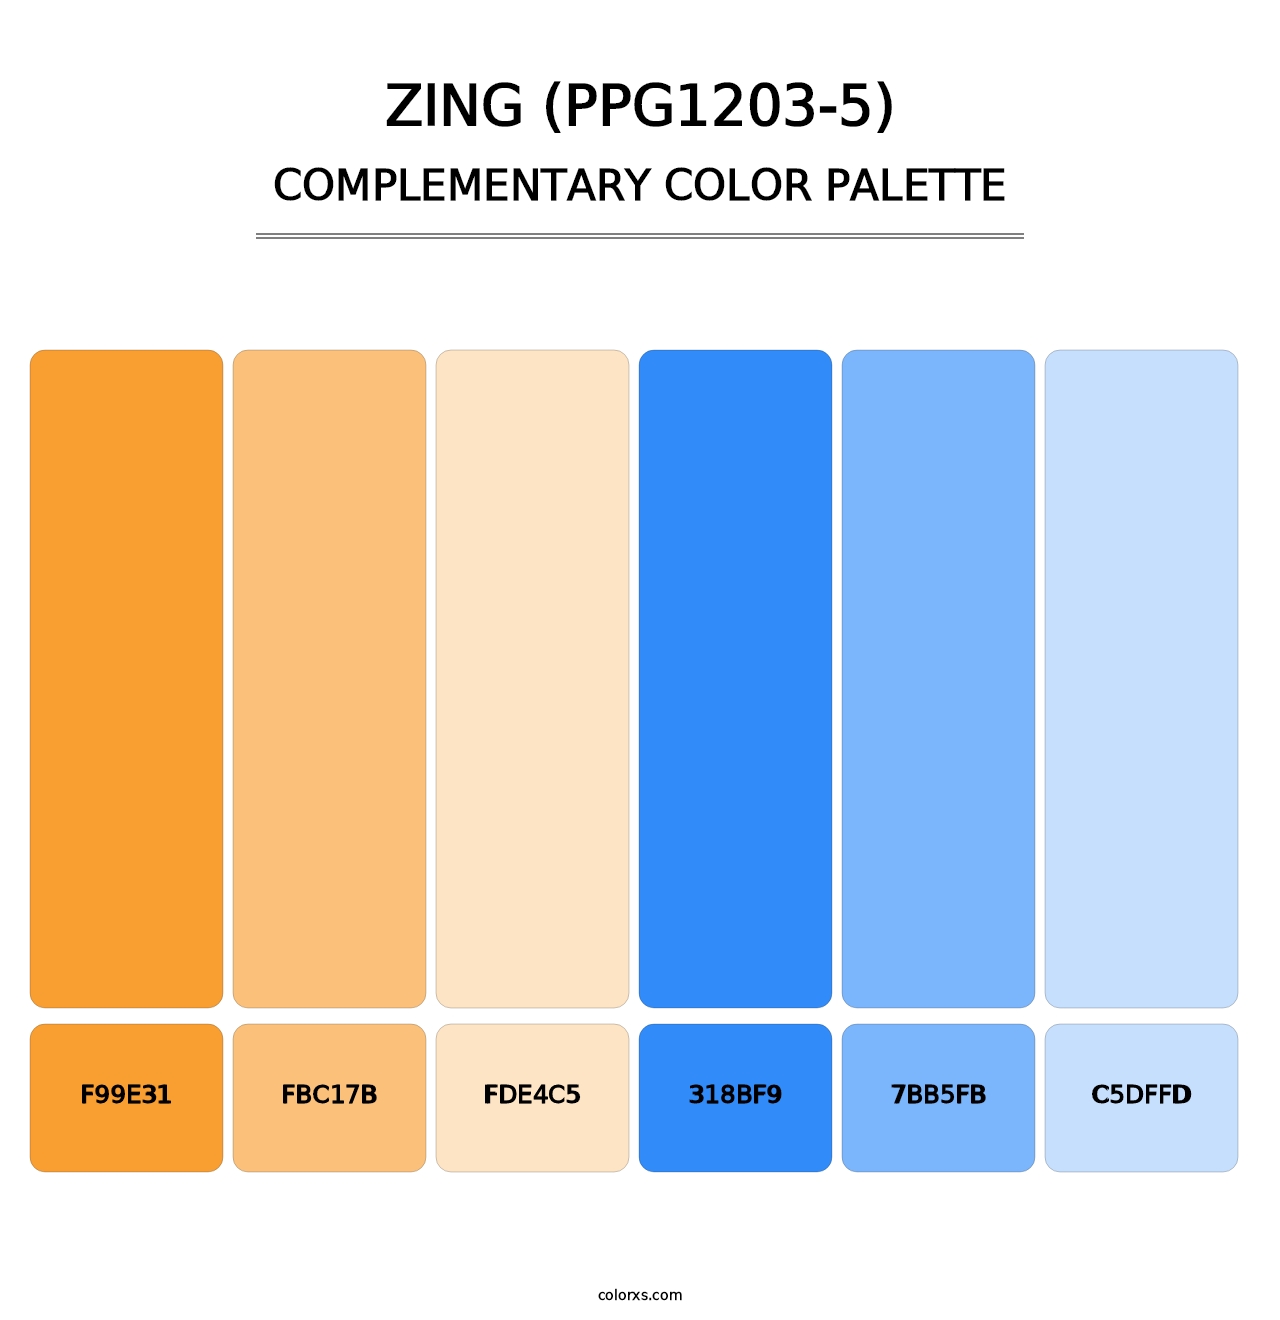 Zing (PPG1203-5) - Complementary Color Palette